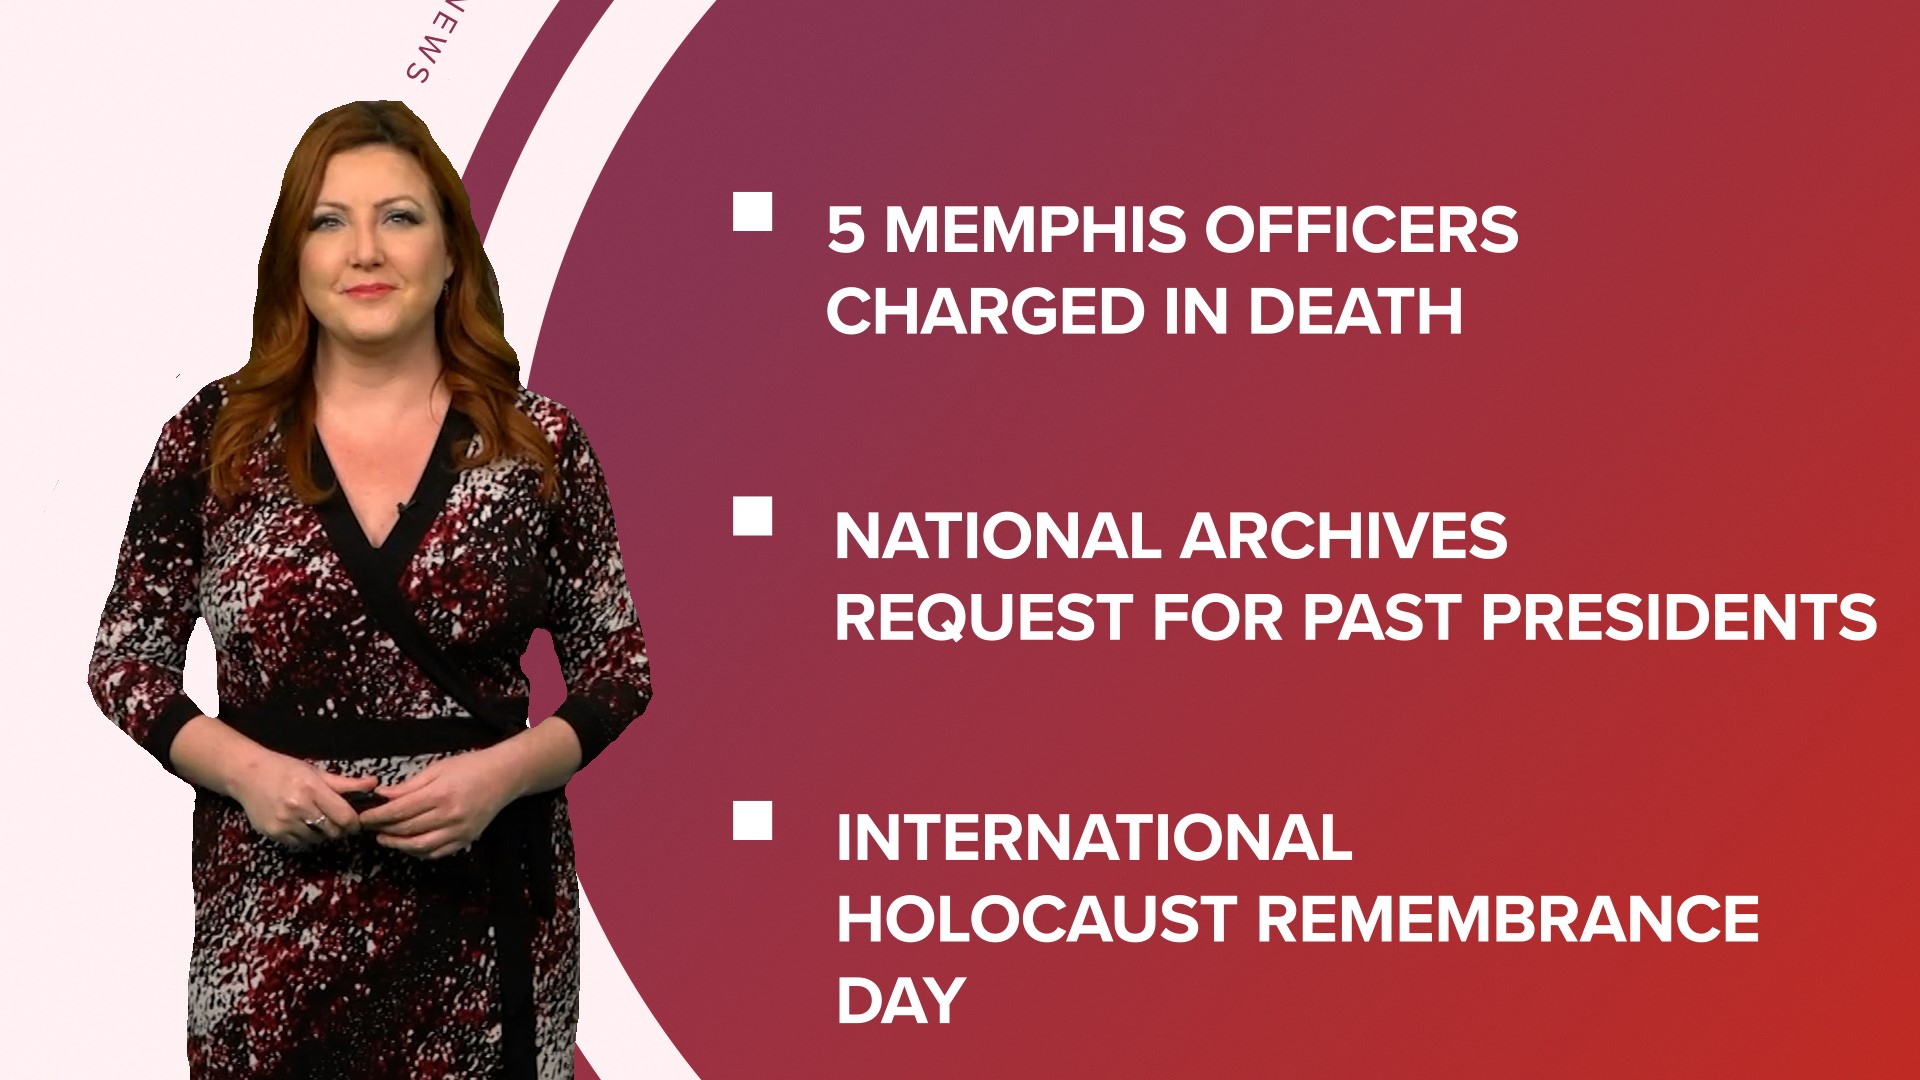 A look at what is happening in the news from 5 Memphis officers charged in a fatal traffic stop death to International Holocaust Remembrance Day.